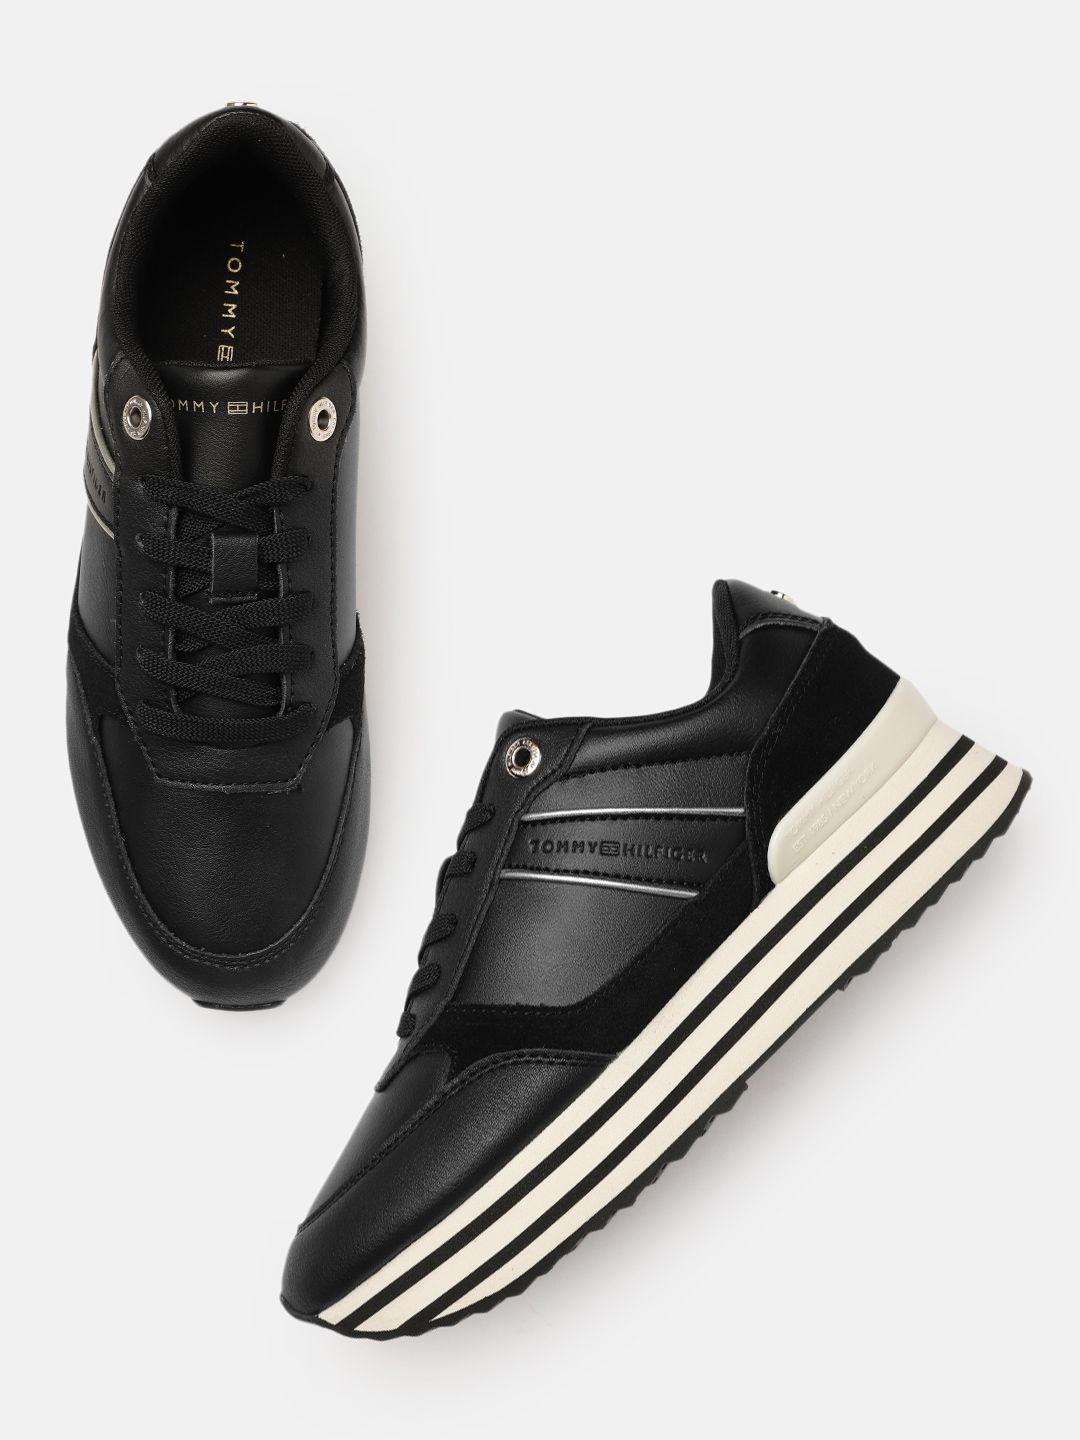 Tommy Hilfiger Women Black Leather Platform Sneakers Price in India